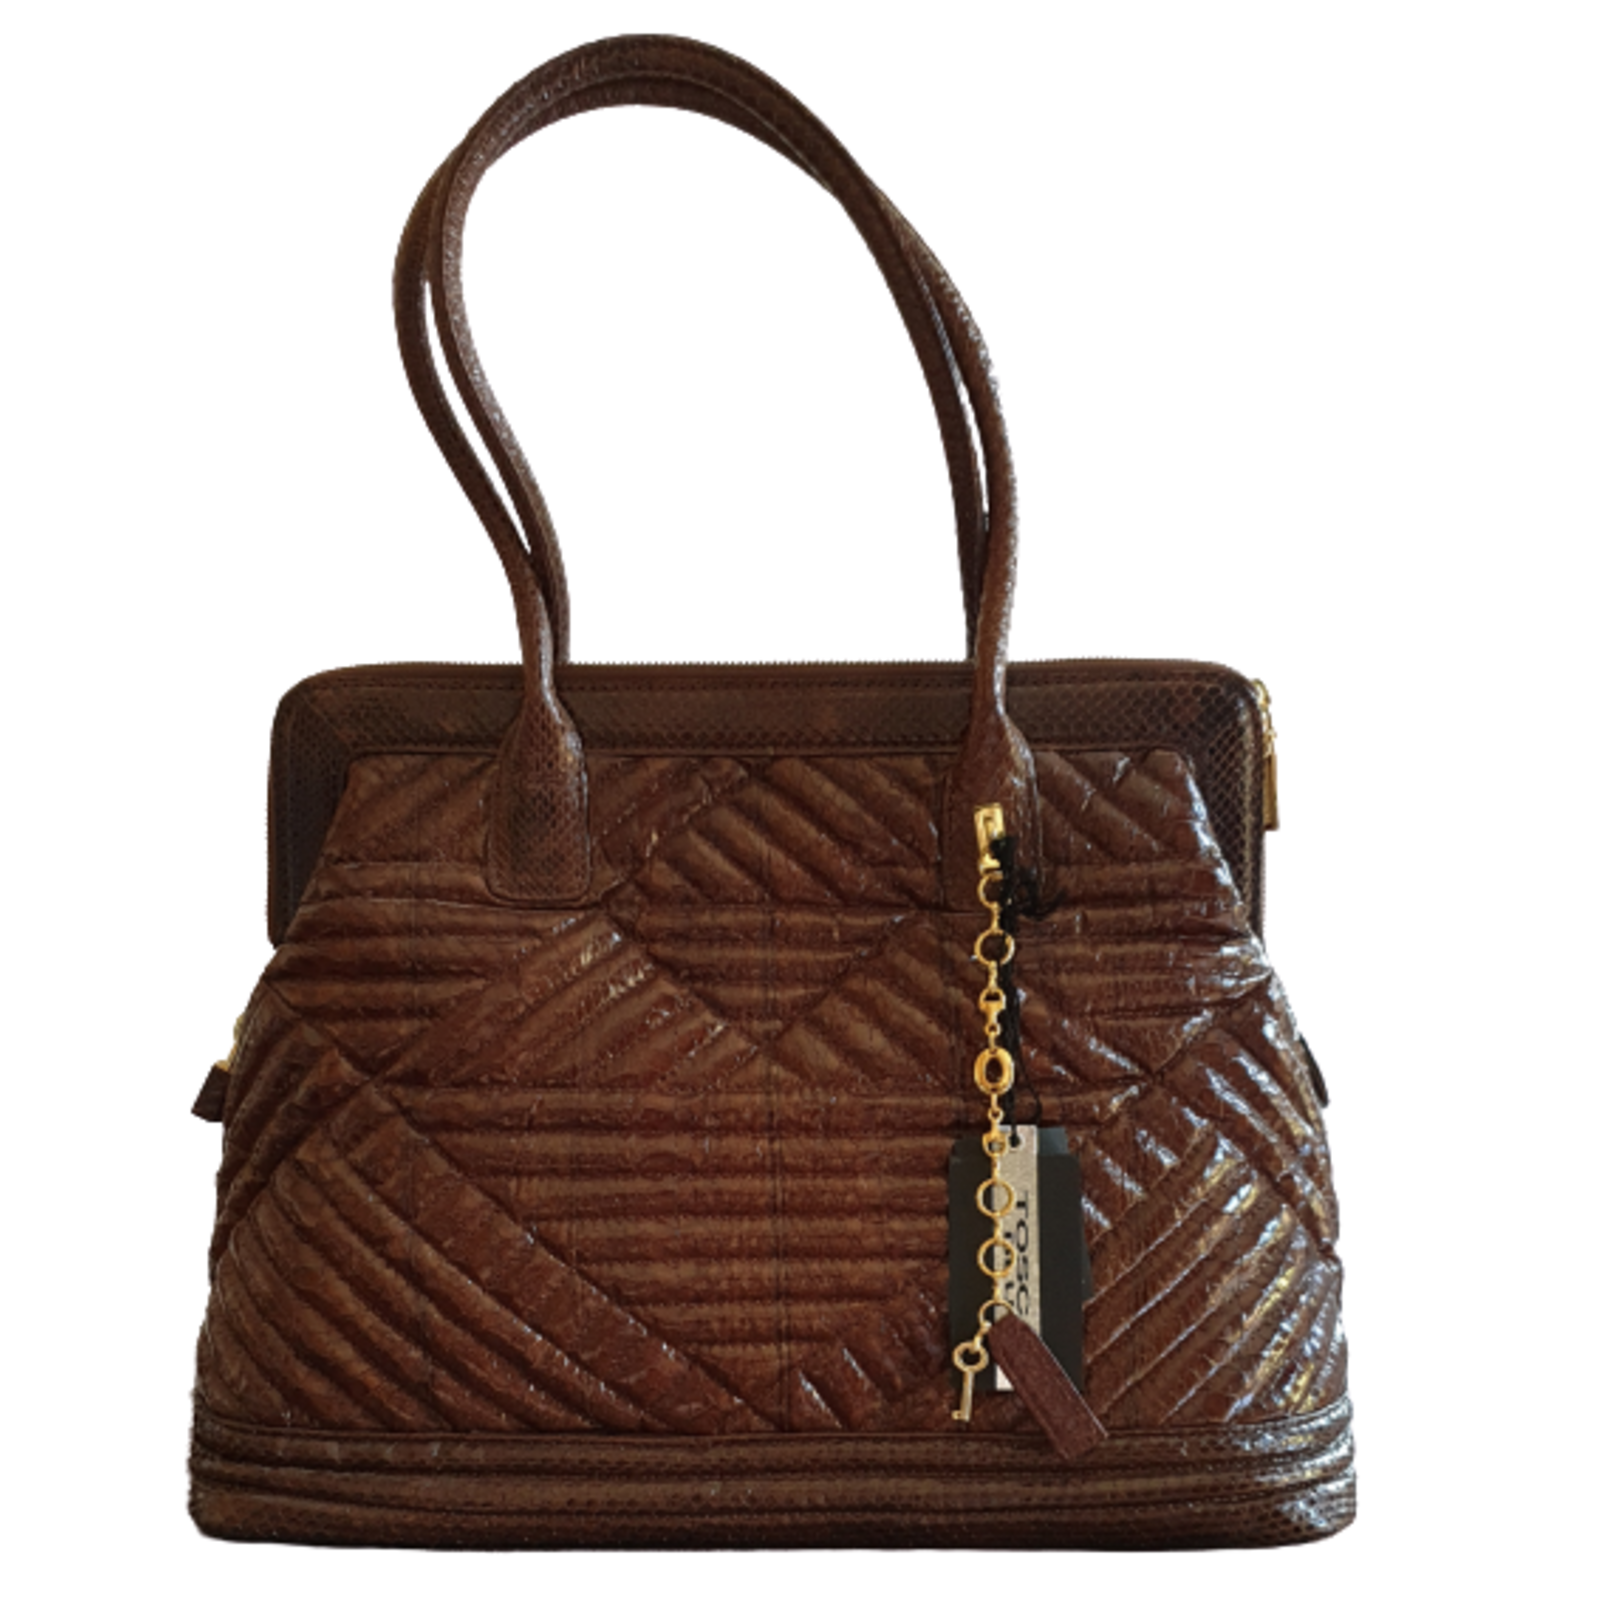 Tosca Blu Tote bag in Brown - Second Hand Tosca Blu Tote bag in Brown buy  used for 141€ (4680878)